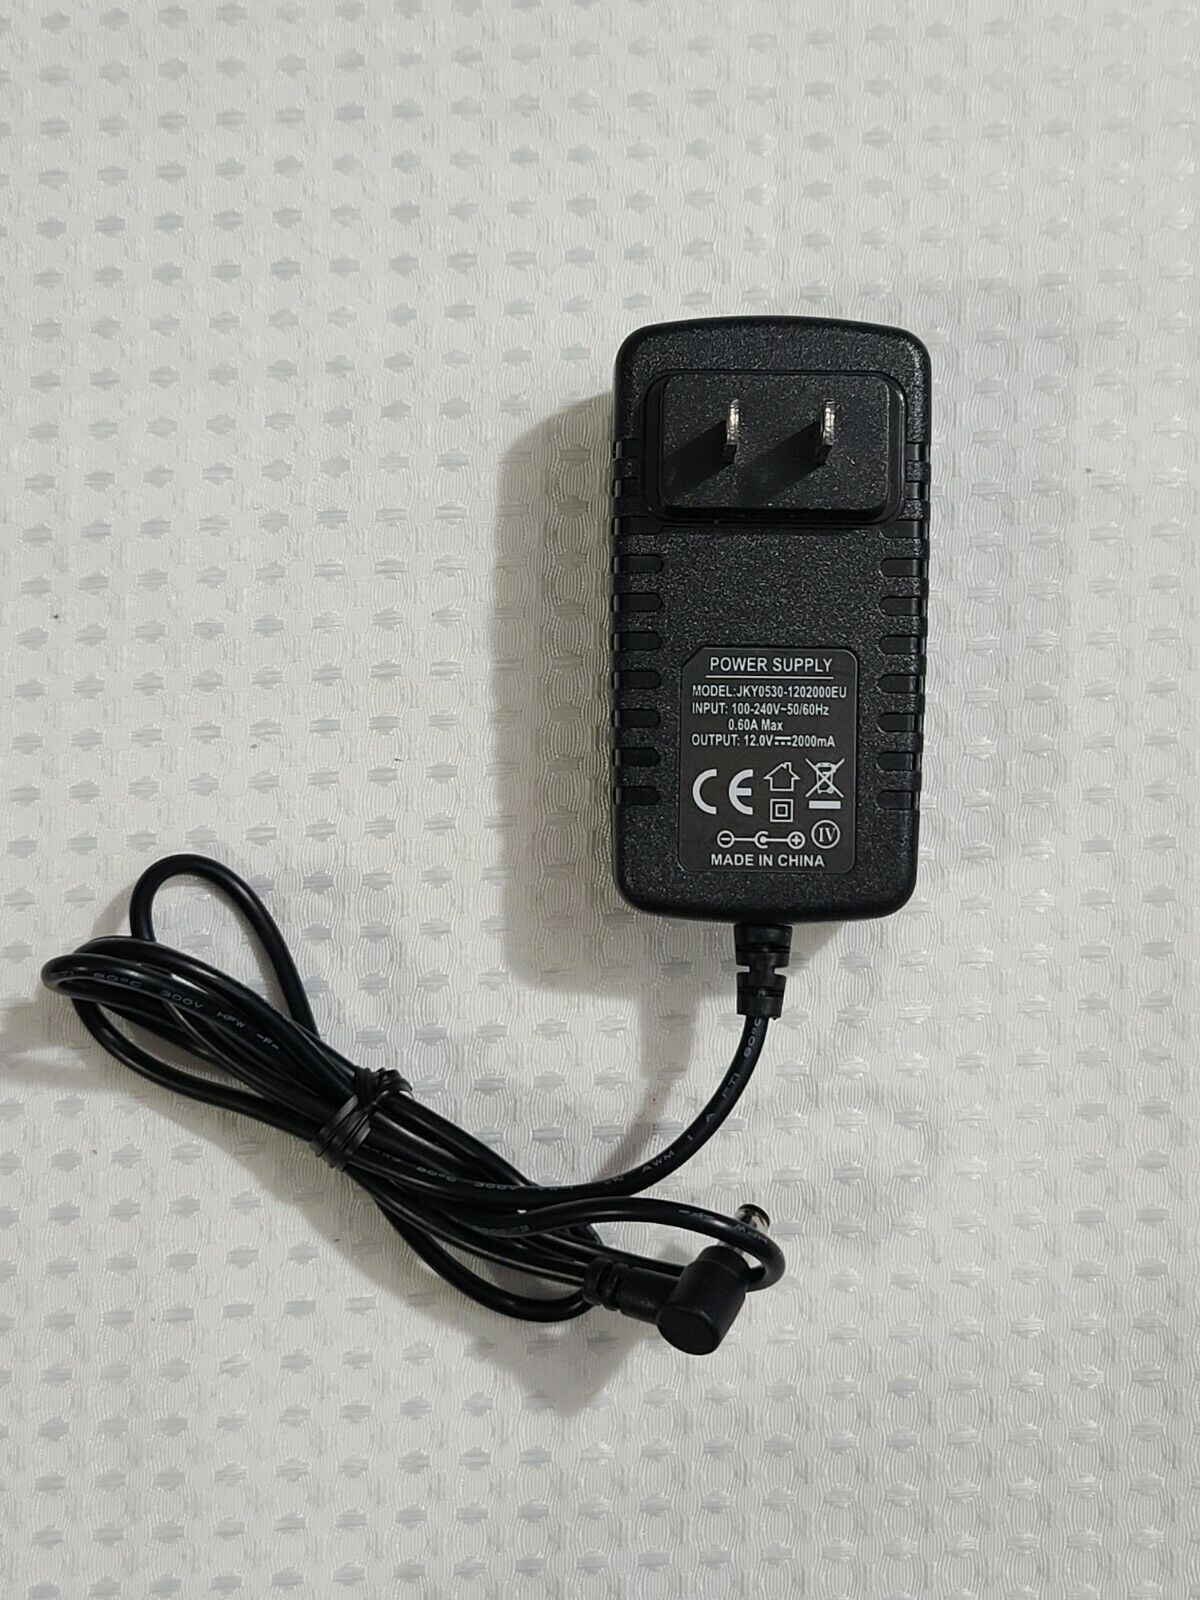 JKY0530-1202000EU - Power Supply Adapter - 12V 2.0A 2000mA - NEW Compatible Brand: For Unbranded/Generic Type: Power